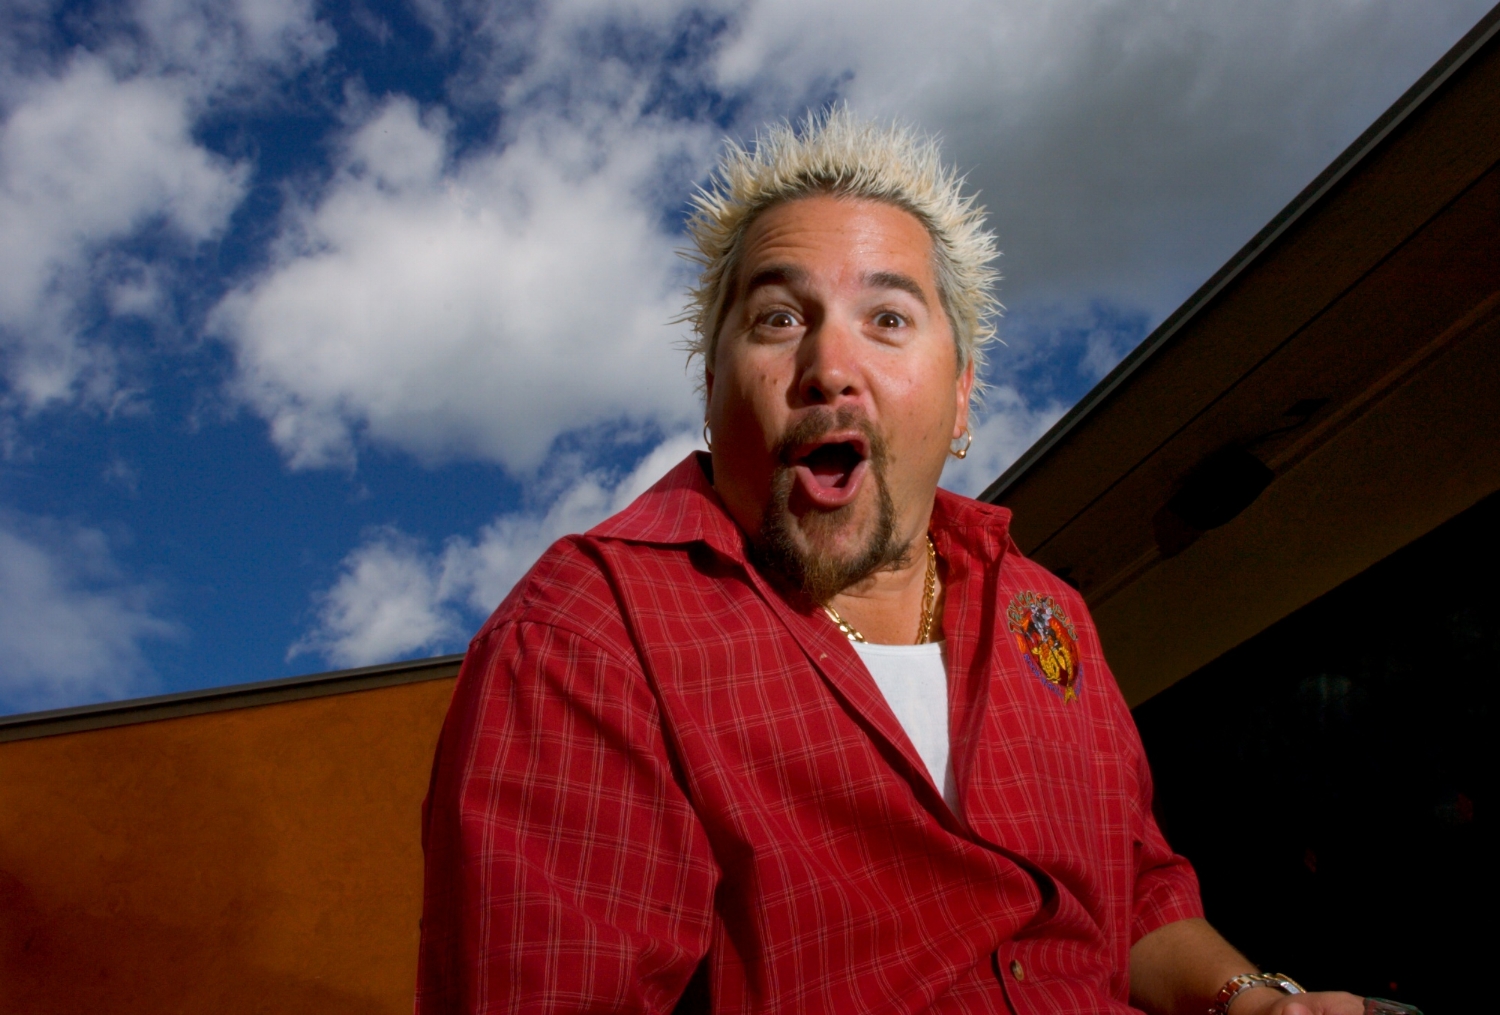  Restauranteur and Food Network personality, Guy Fieri at his restaurant, Tex Wasabi's in Sacramento on Tuesday March 27, 2007. 